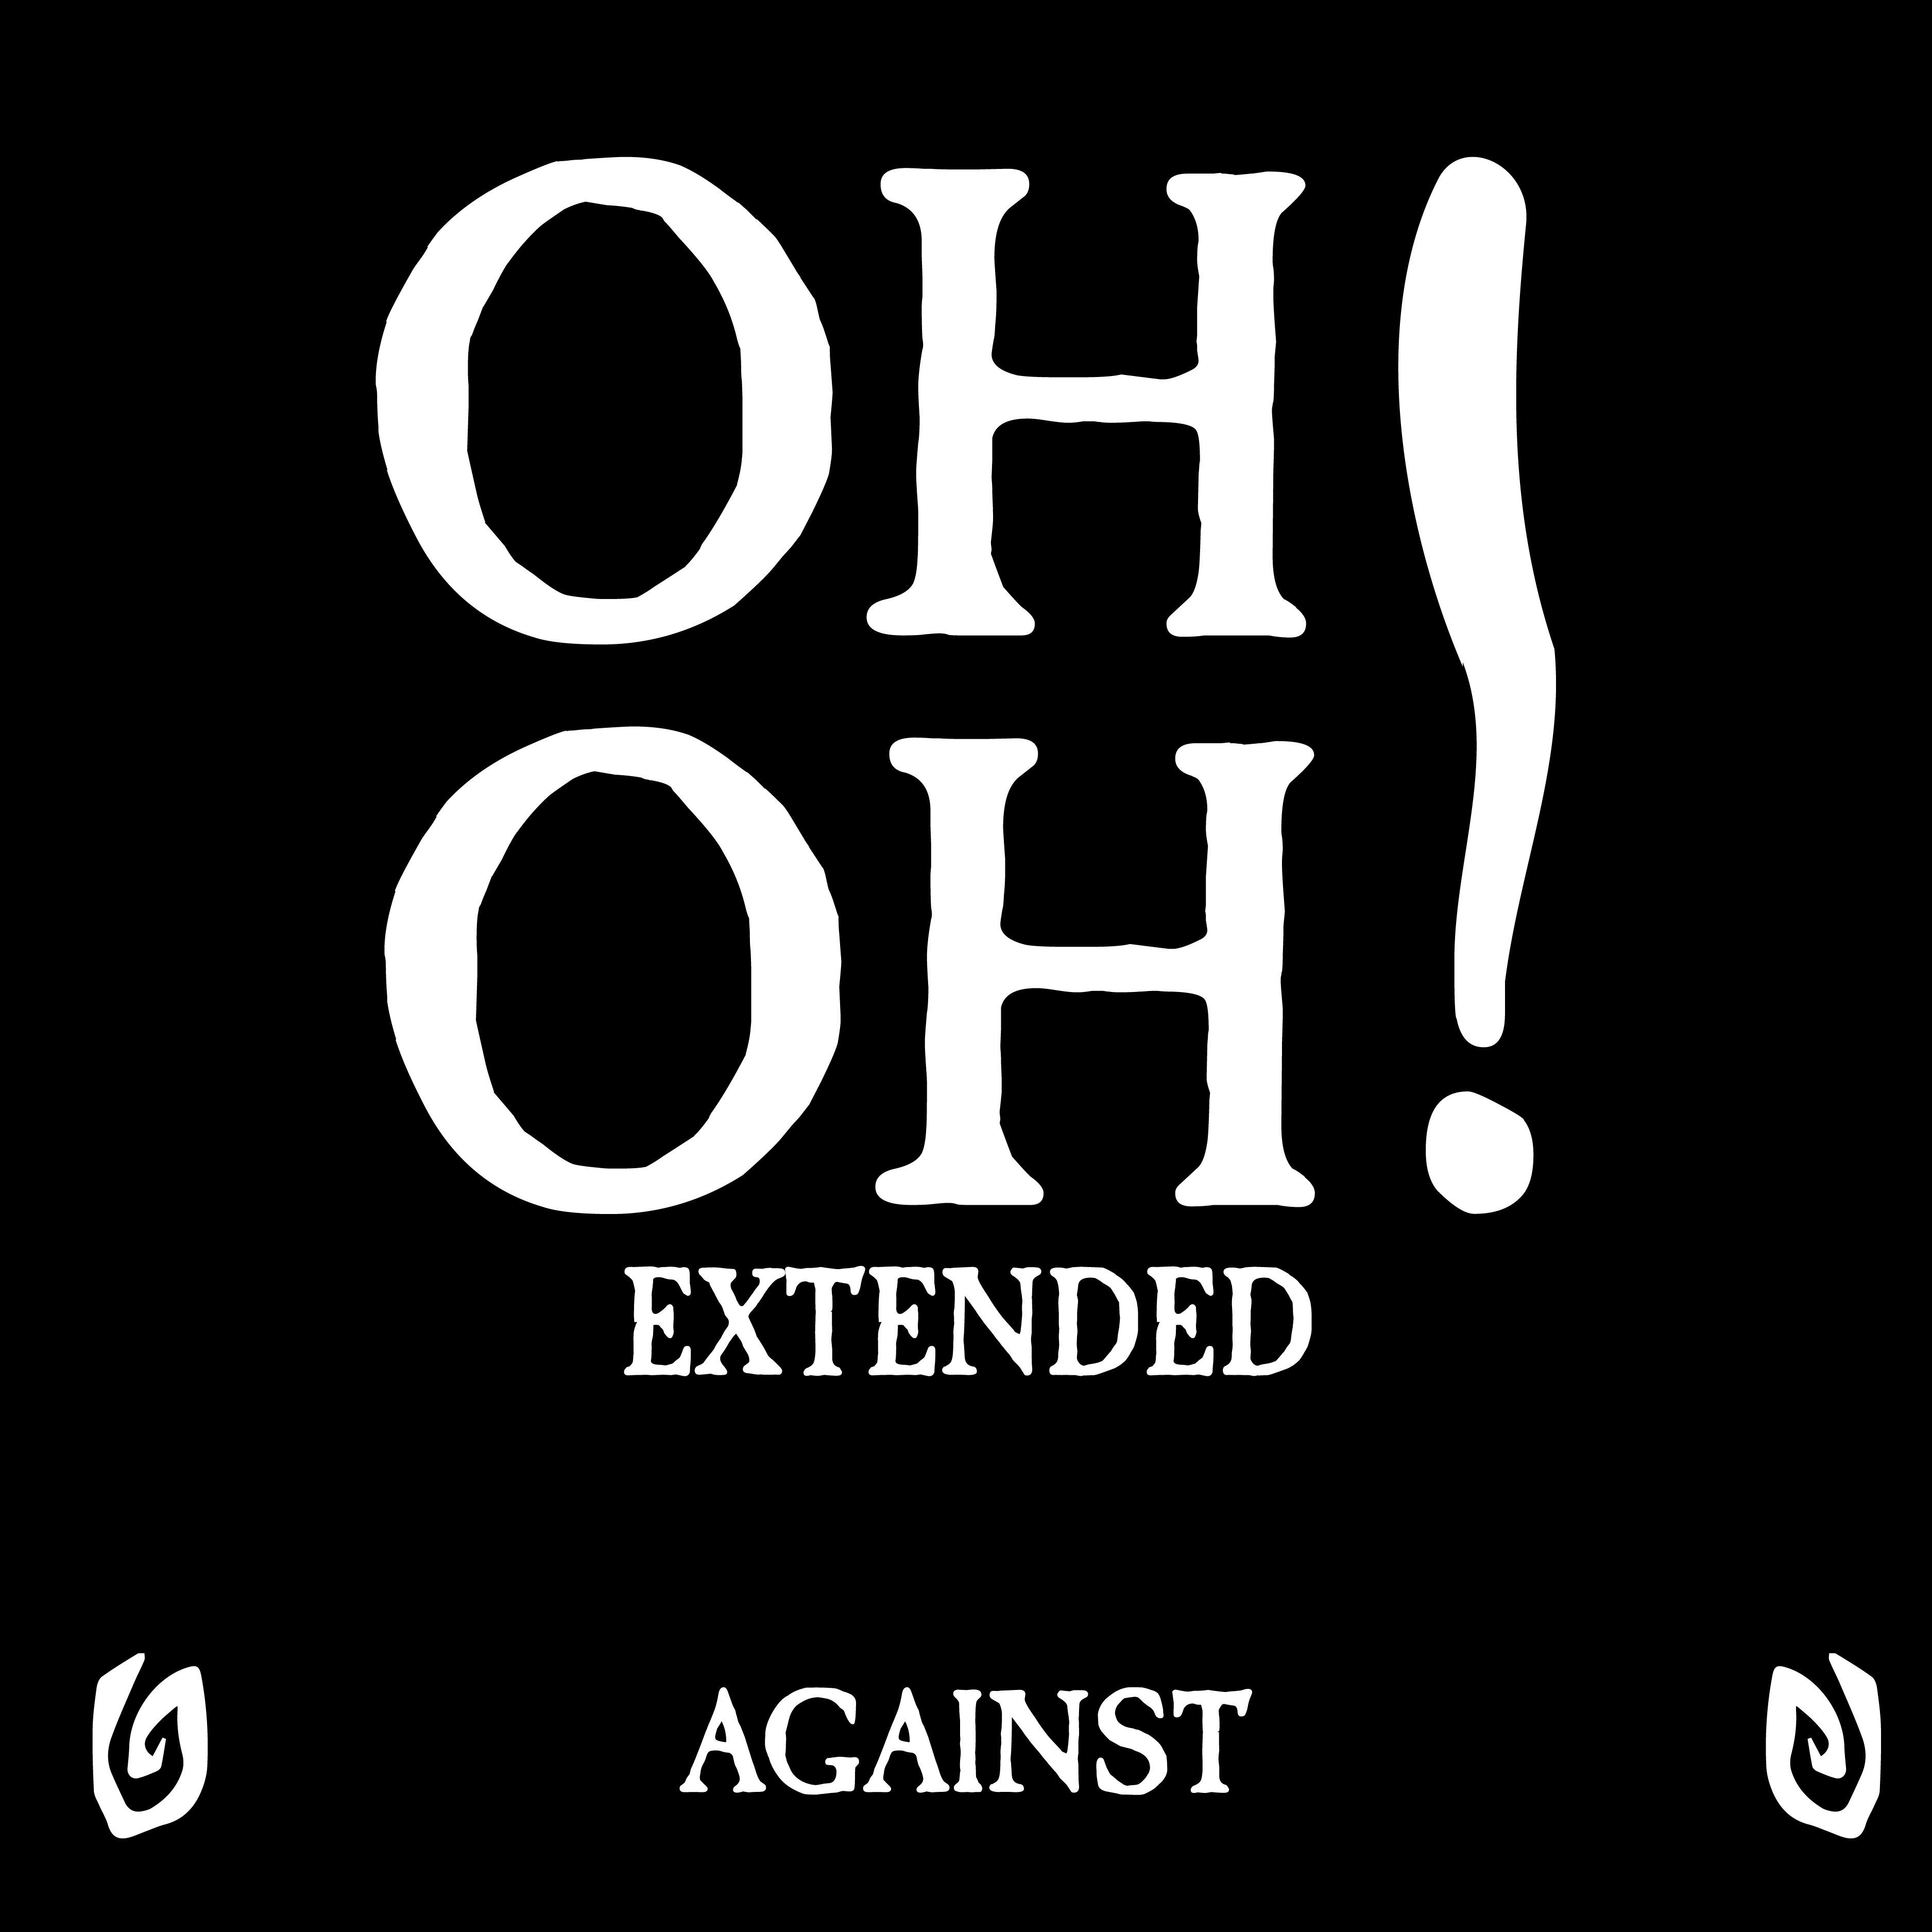 OH OH! Extended